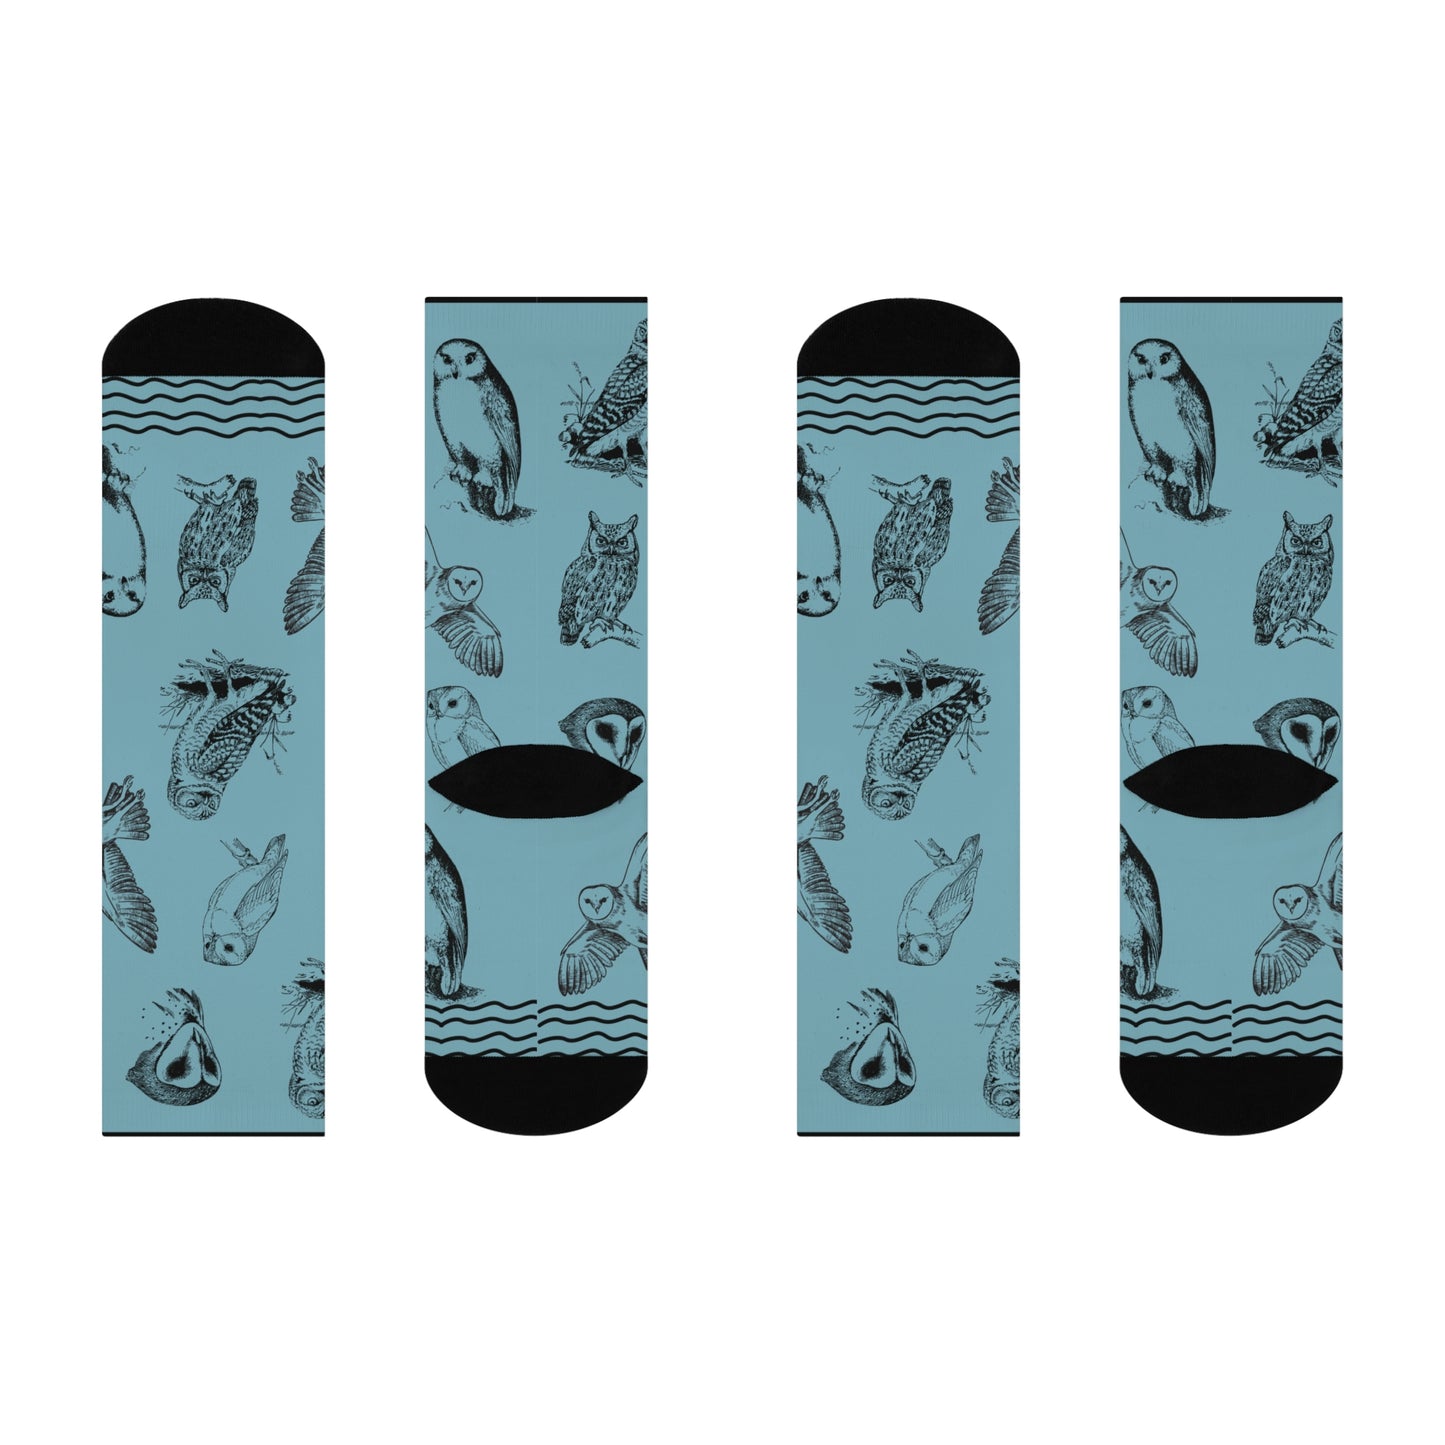 Wise Owl Socks Sketches Unisex Adult Stretchy Mid Calf Original